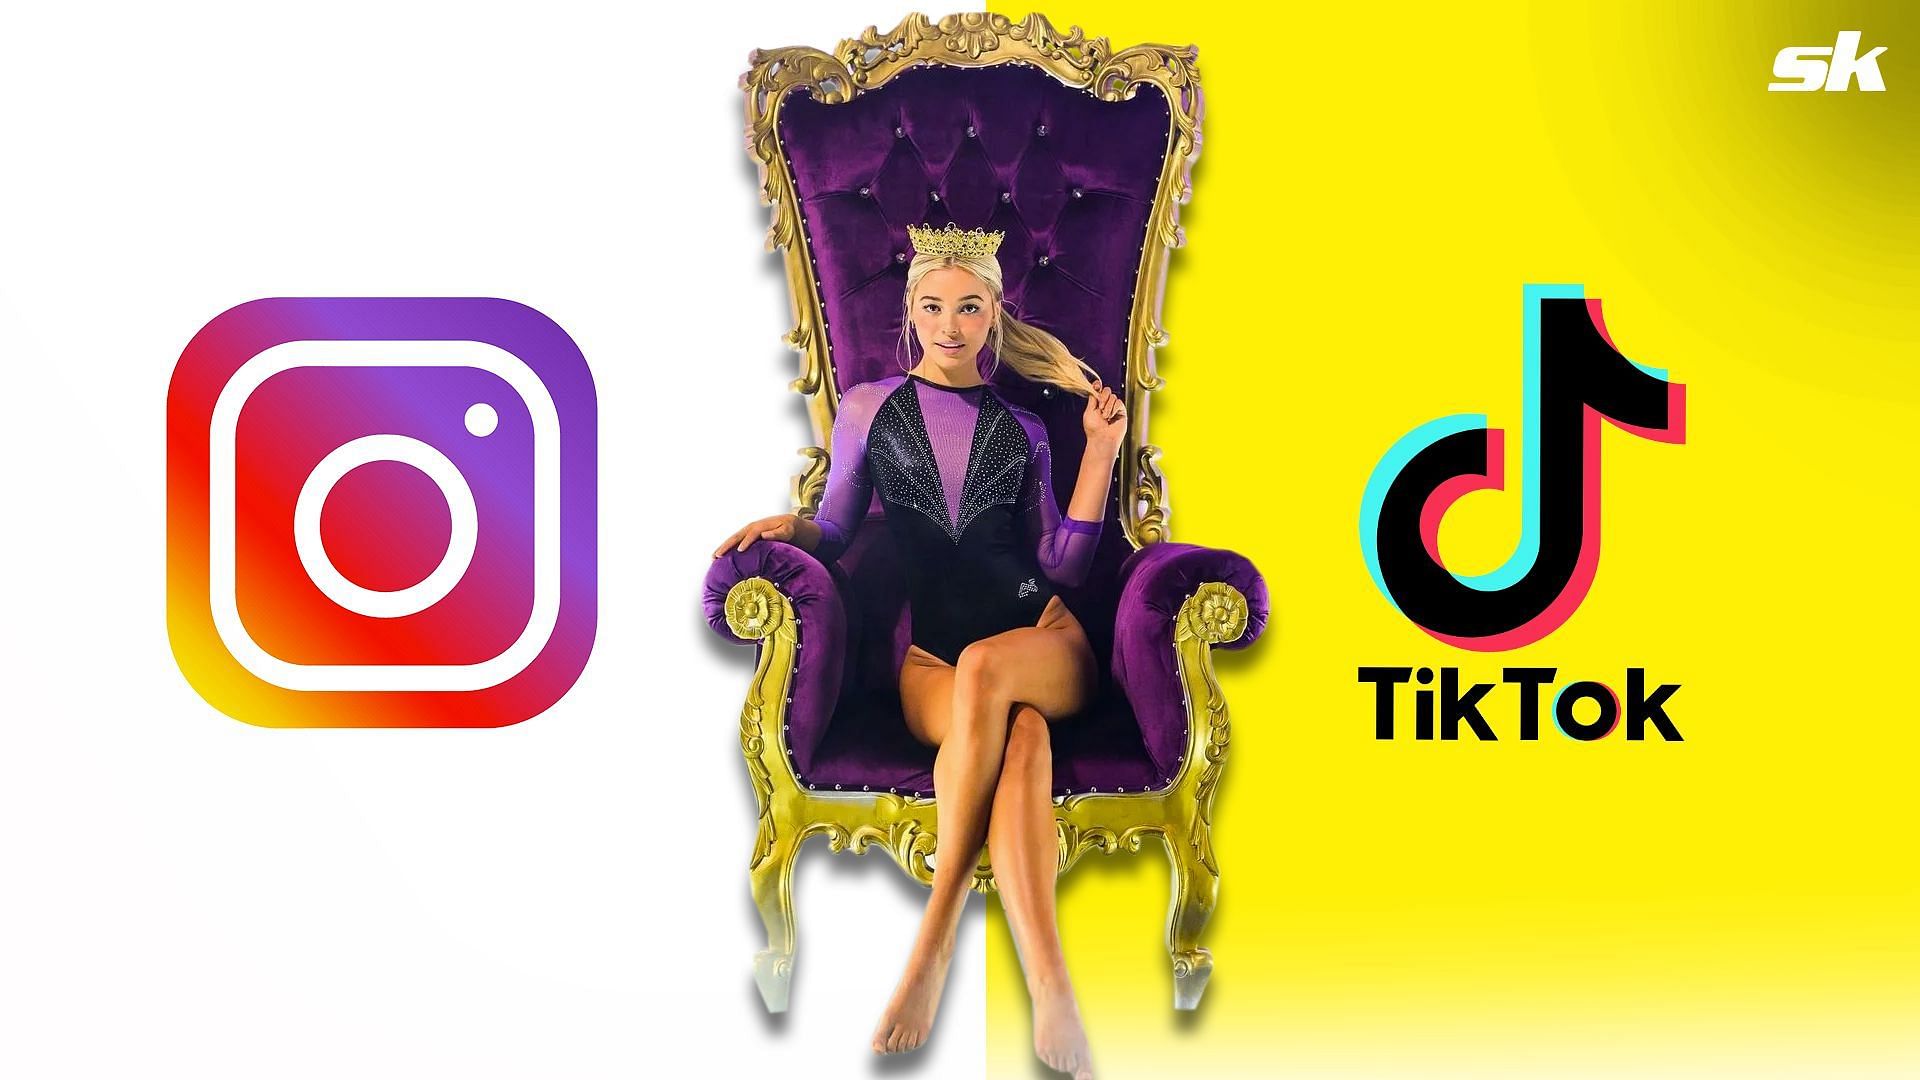 Olivia Dunne talks about her most viral Instagram and TikTok posts